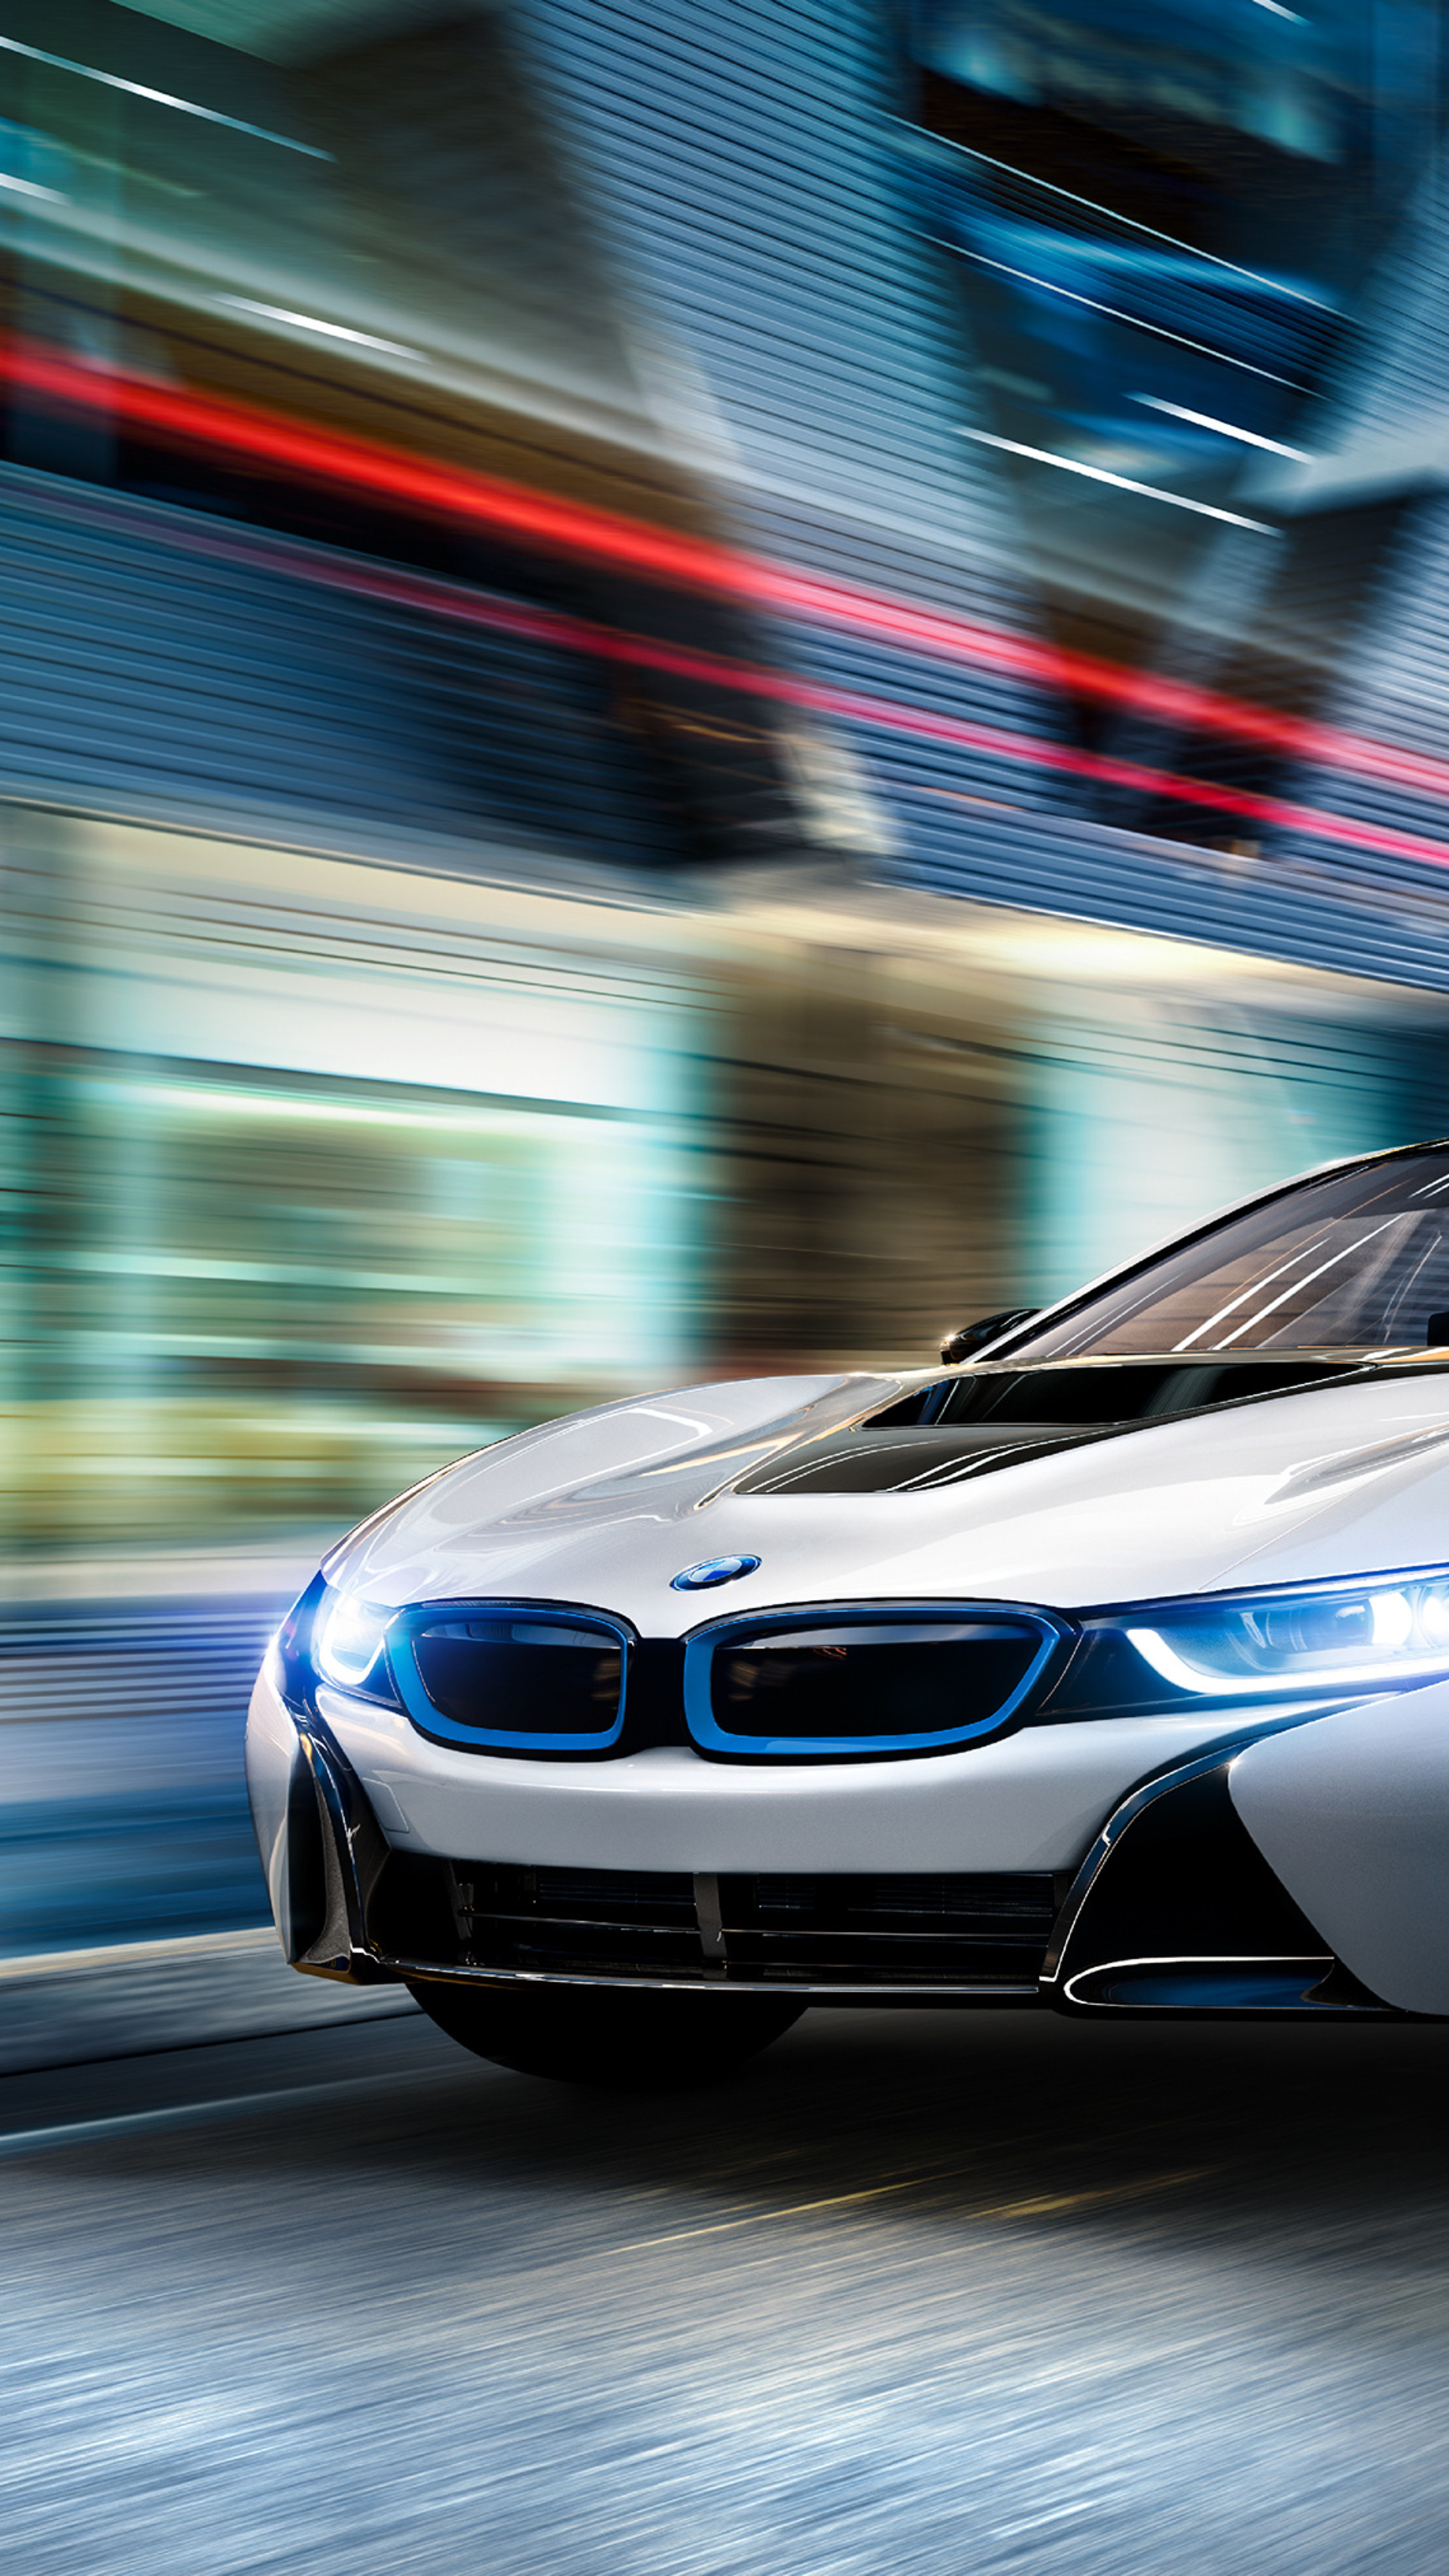 BMW i8, Nighttime beauty, Cutting-edge technology, Automotive excellence, Unmatched power, 2160x3840 4K Phone